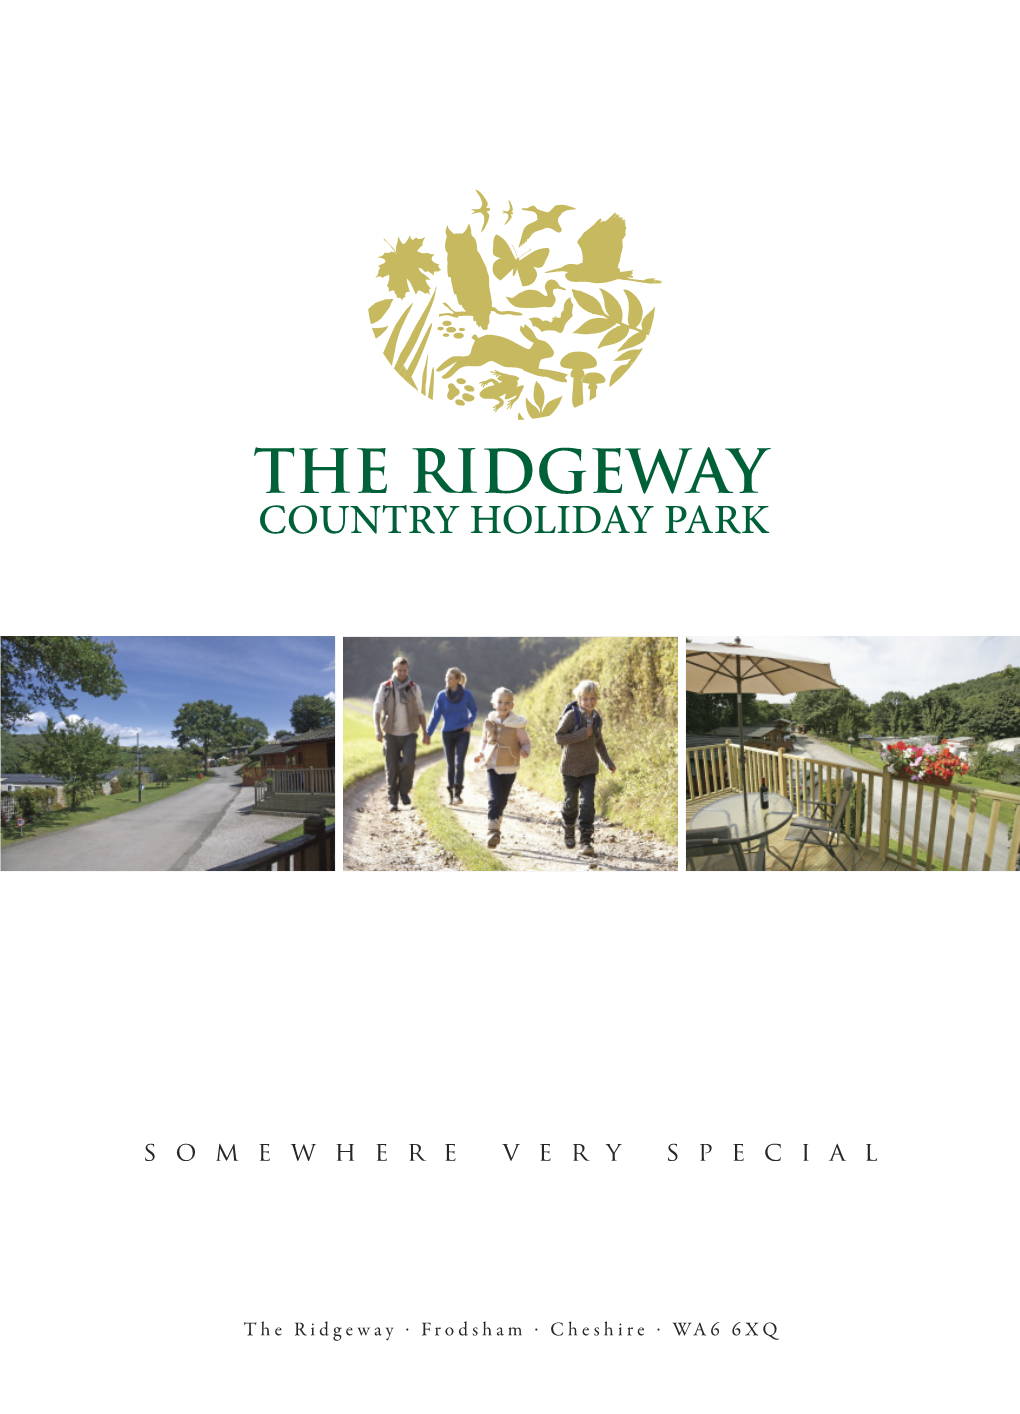 The Ridgeway Country Holiday Park